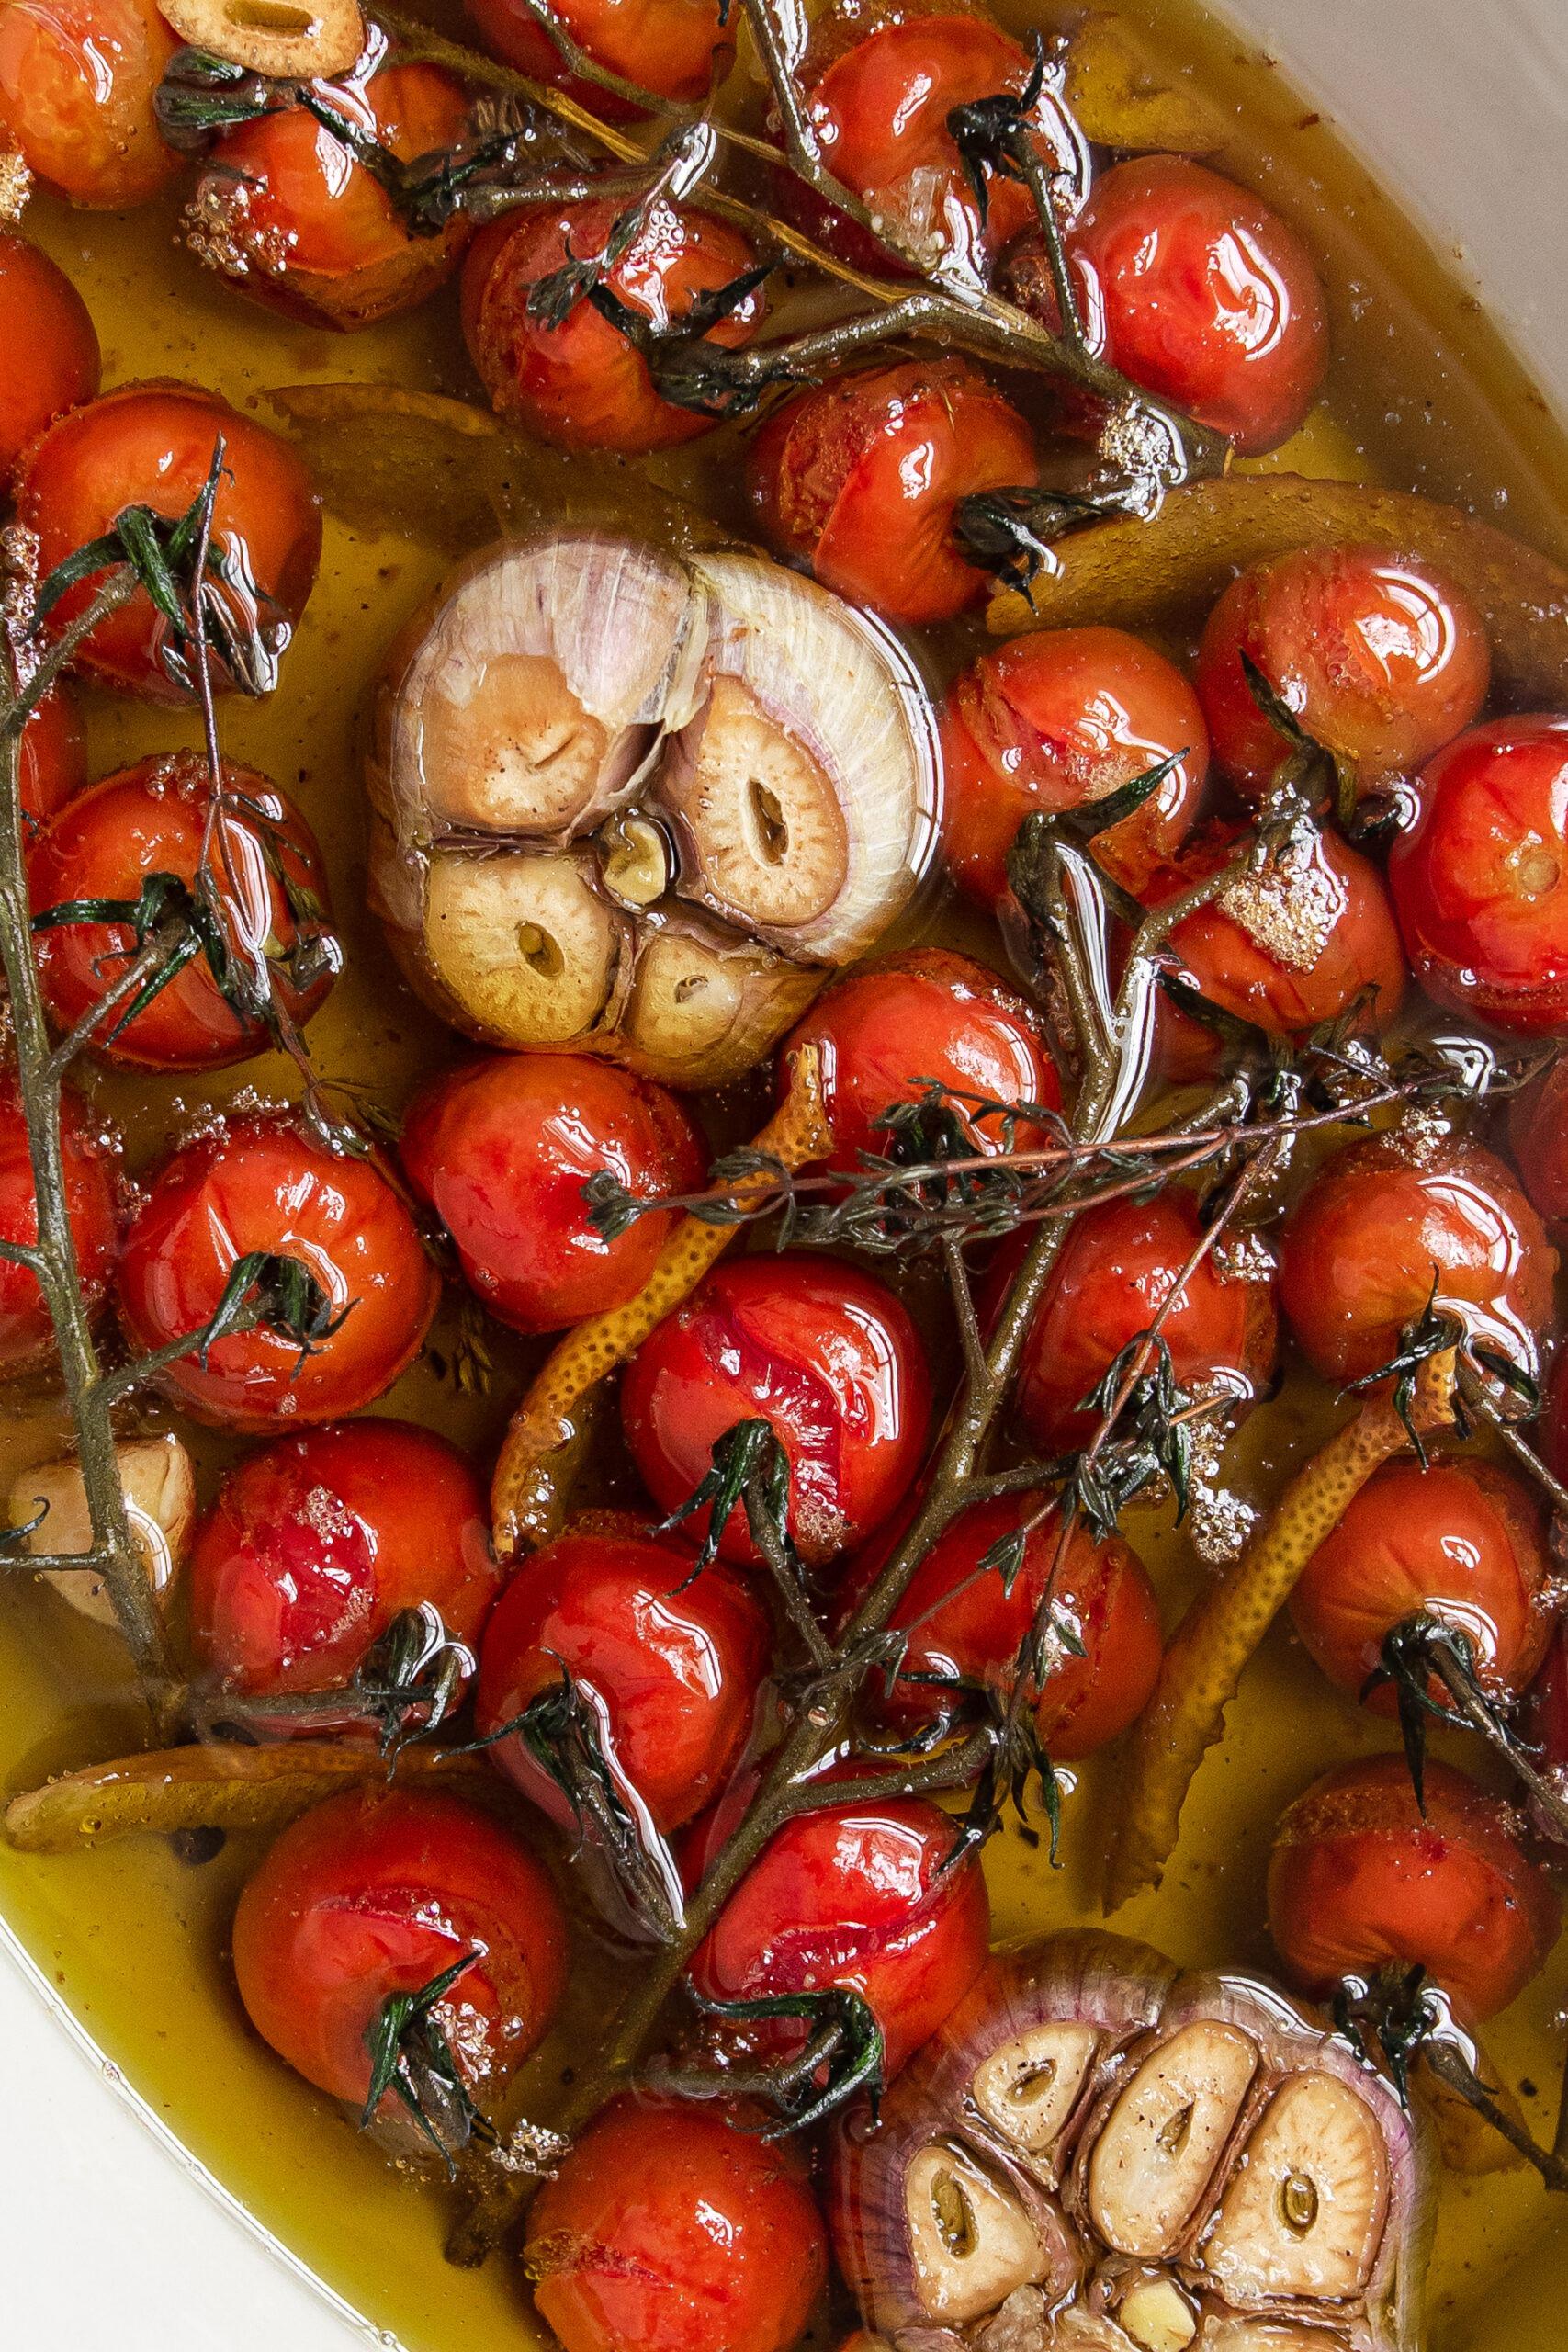 Cherry tomatoes confit with garlic and lemon peels.